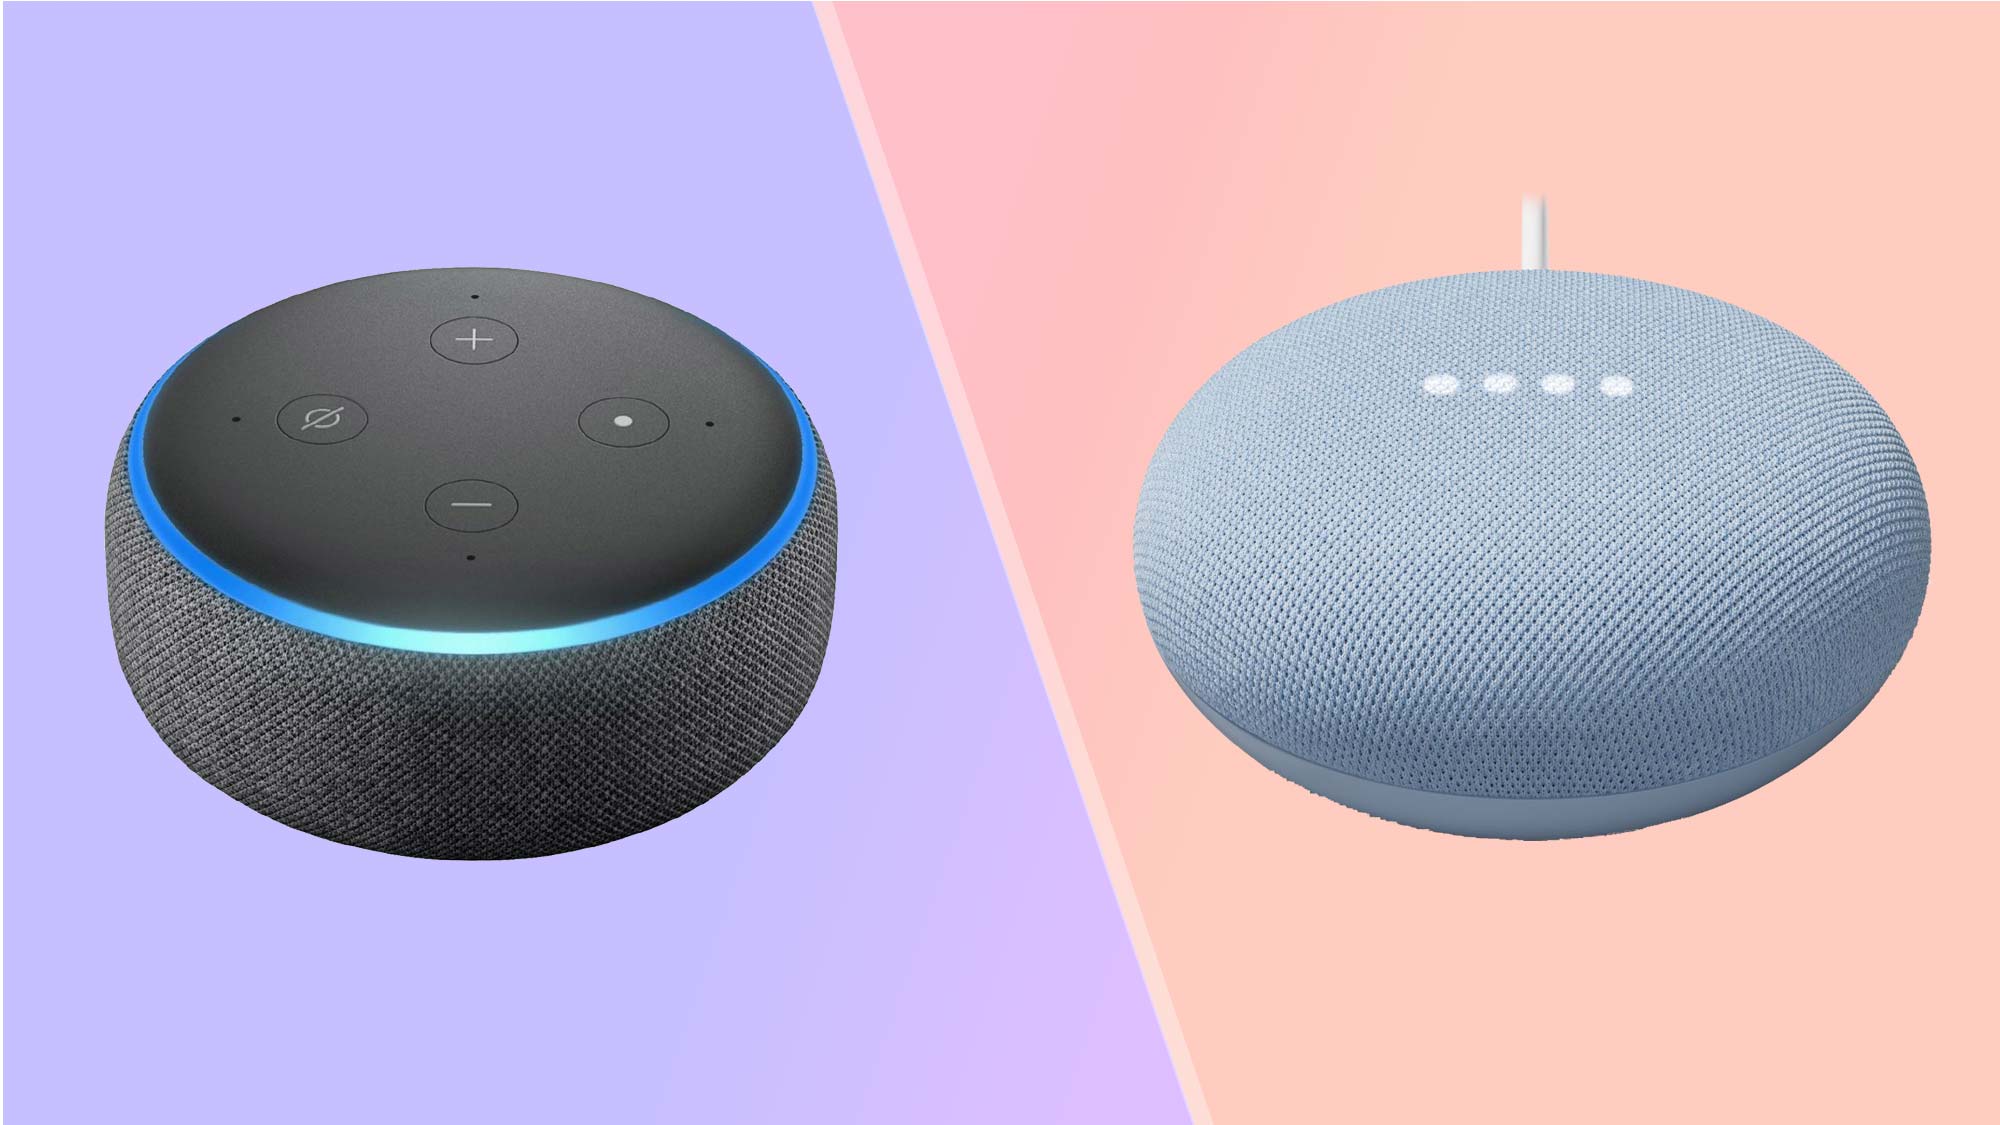 What Is Better: Alexa Or Google Assistant?